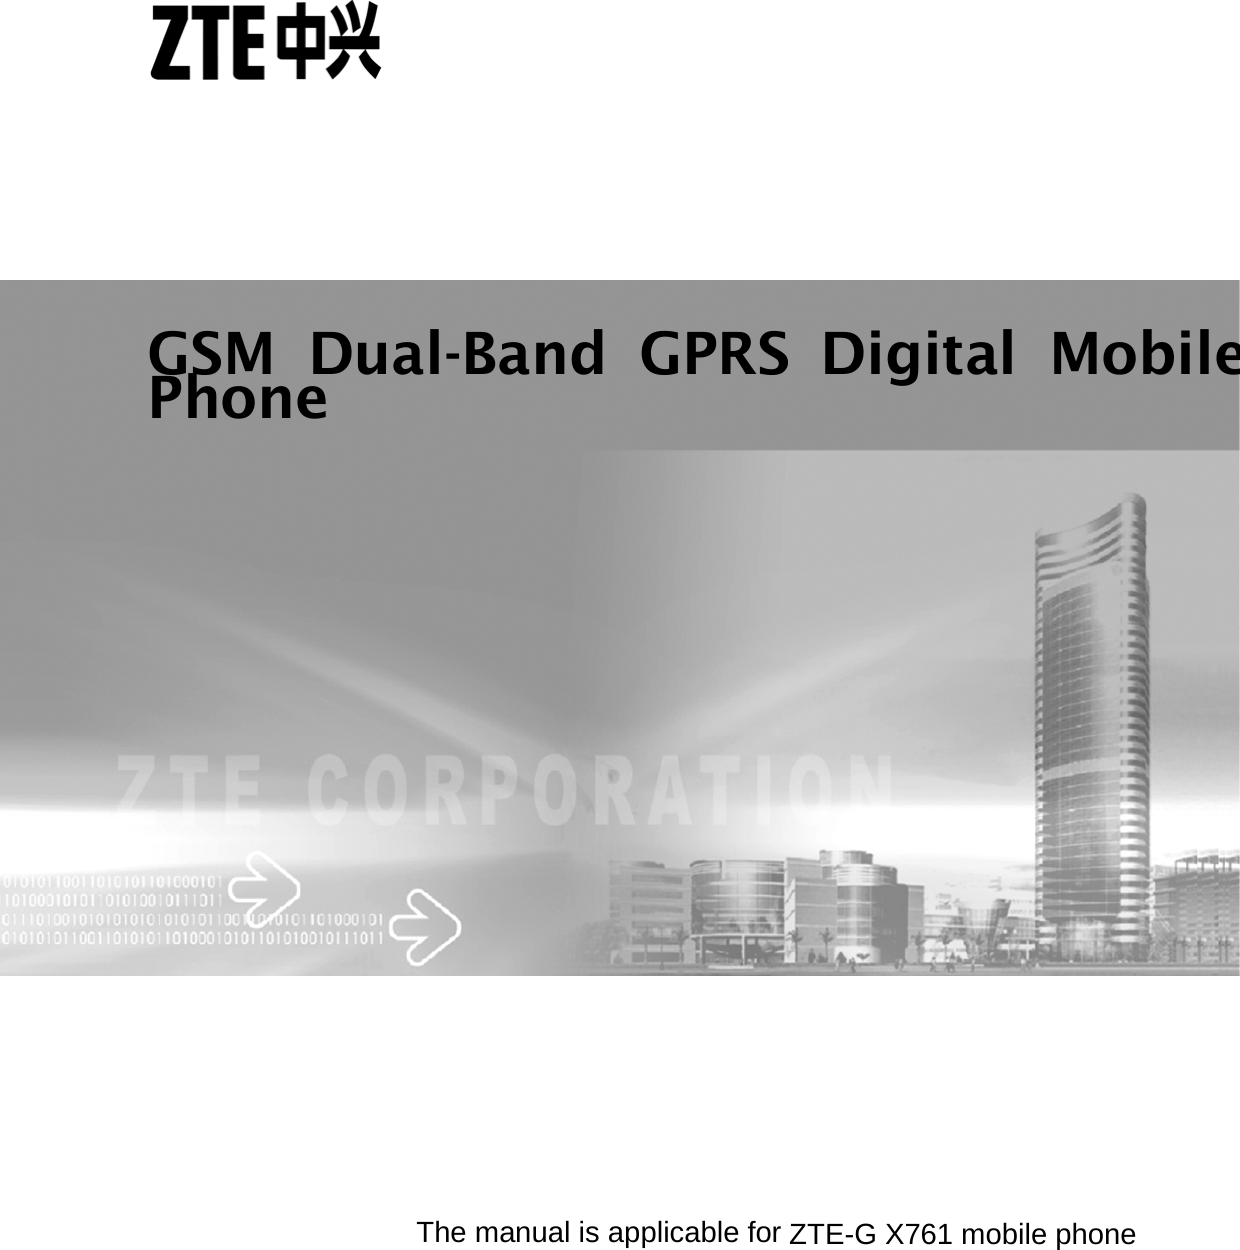          The manual is applicable for ZTE-G X761 mobile phone GSM Dual-Band GPRS Digital MobilePhone 